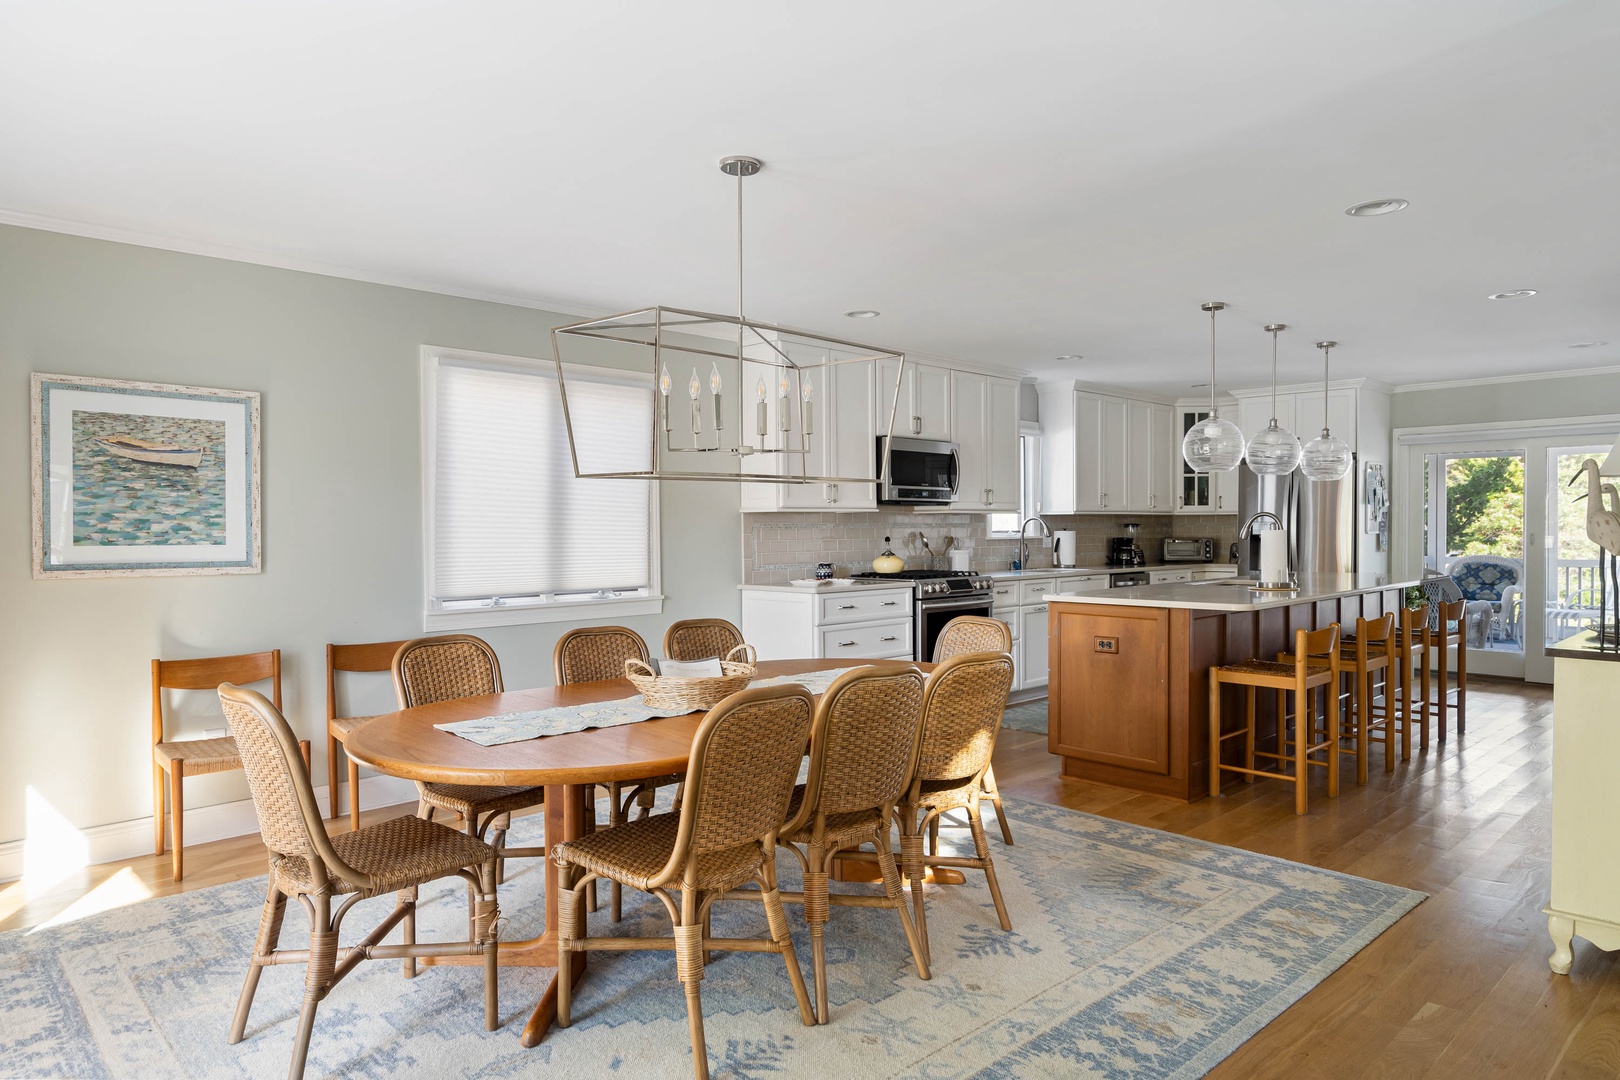 Enjoy an open Kitchen with counter seating for 4 along with the Dining Area offering seating for 8